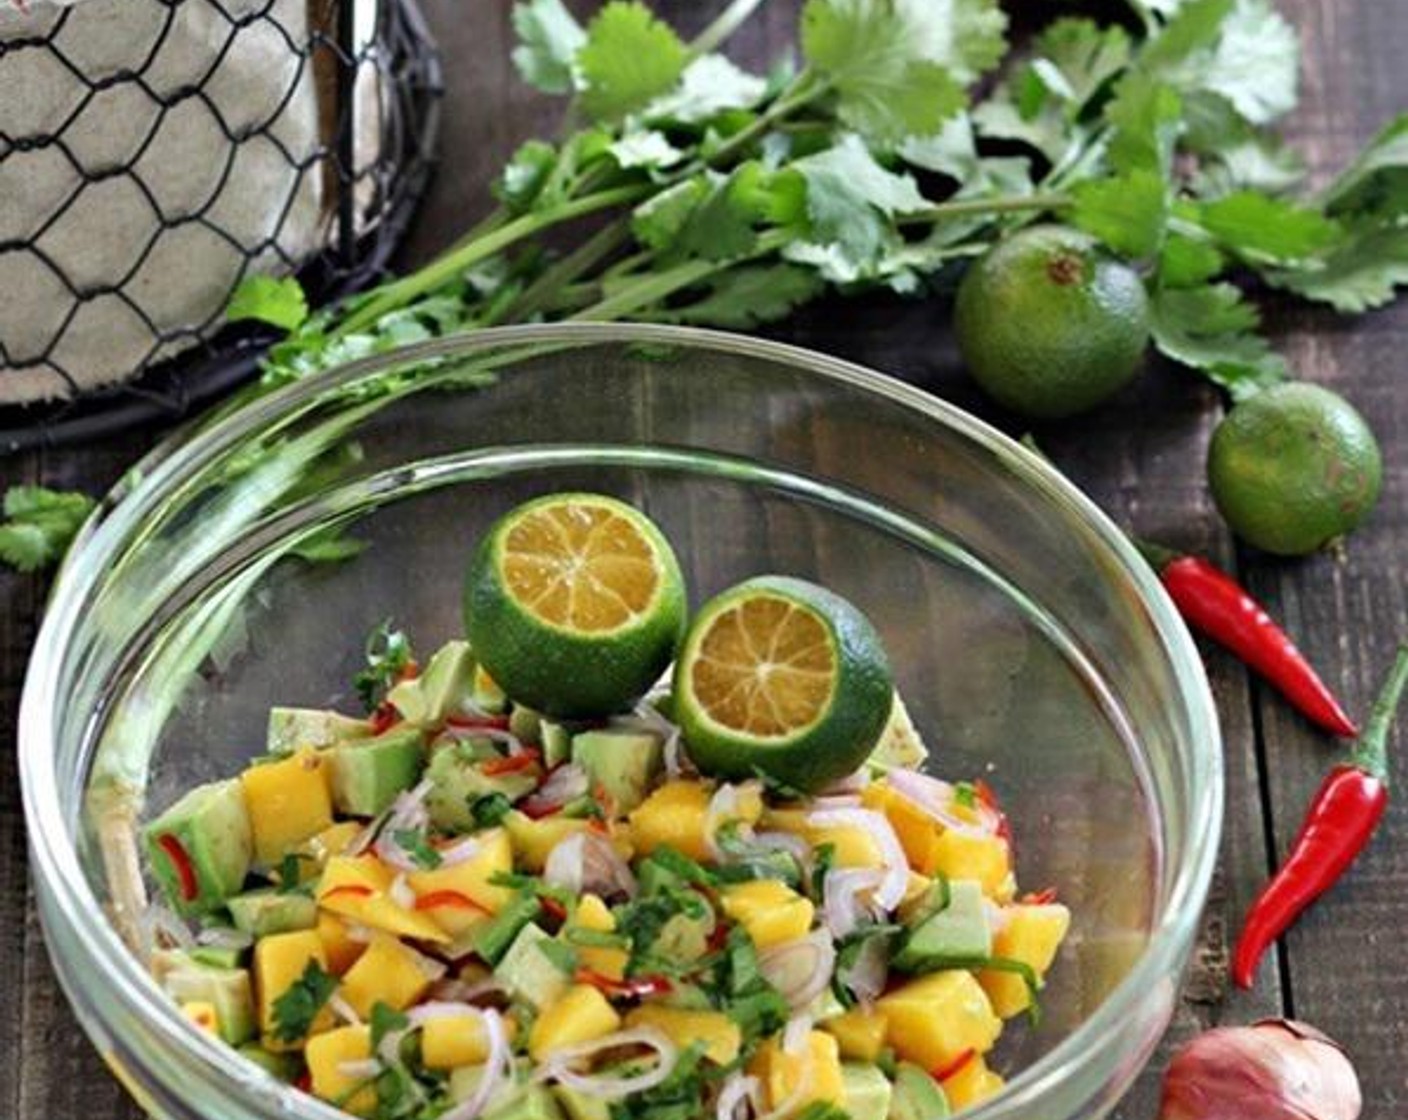 step 1 Mix Mango (1), Avocado (1), Shallot (1), Red Chili Pepper (1), Fresh Cilantro (2 Tbsp) together in a bowl and squeeze Limes (2) over it and mix well.